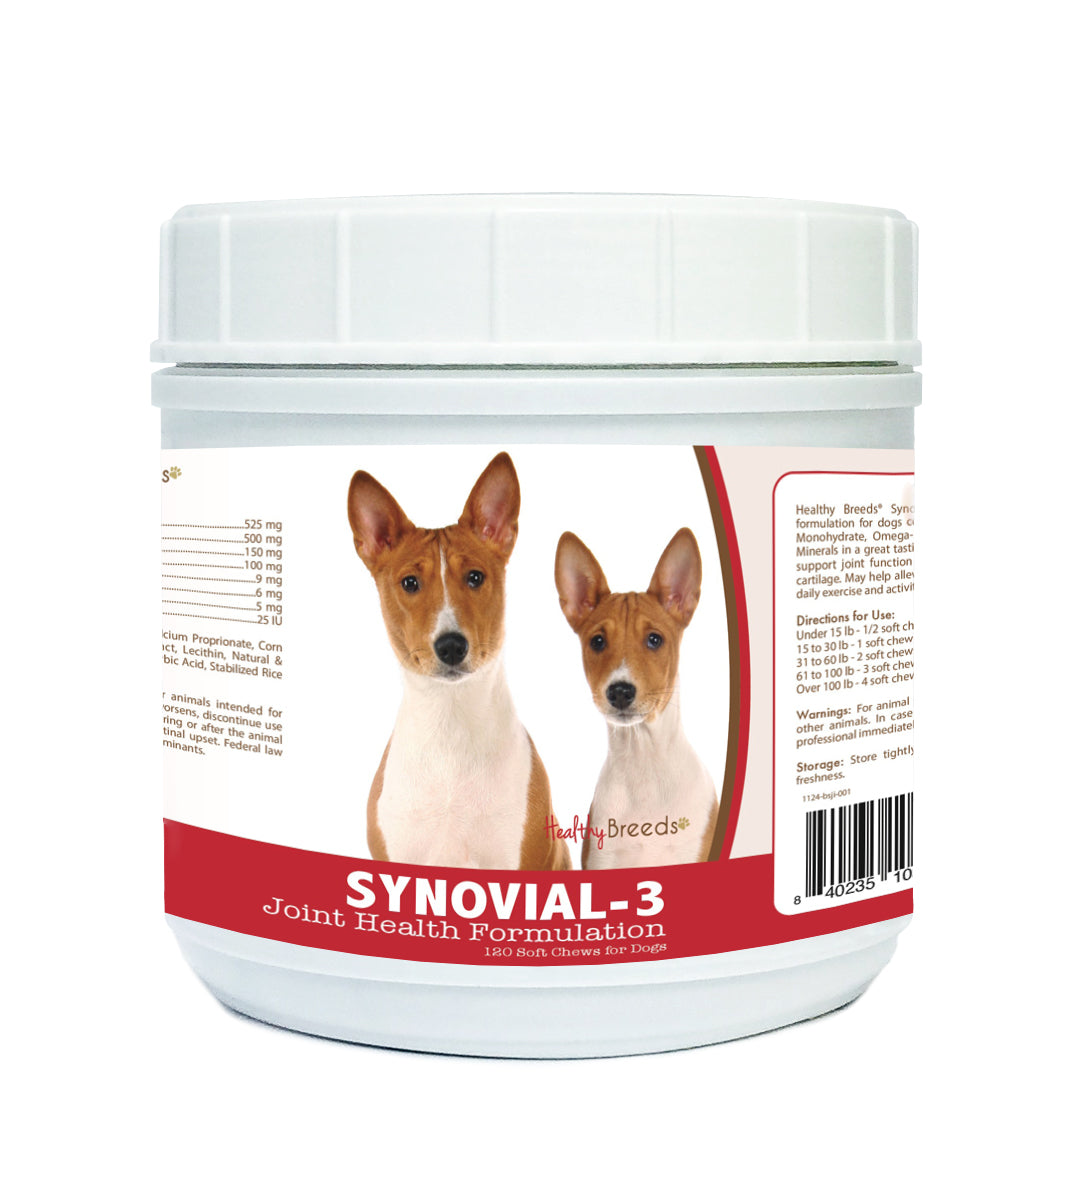 Basenji Synovial-3 Joint Health Formulation Soft Chews 120 Count